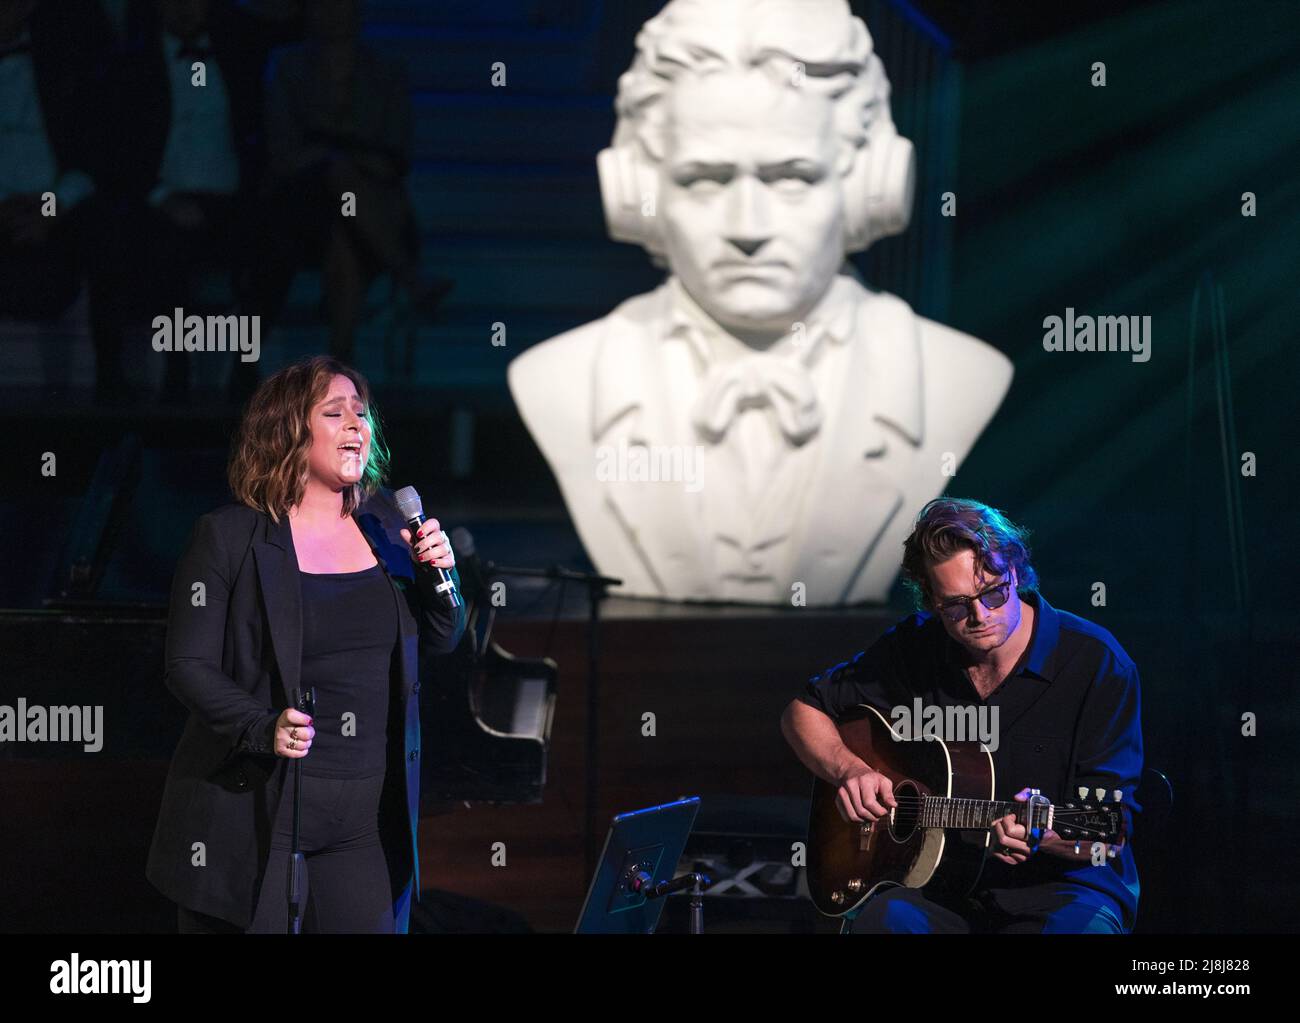 2022-05-16 17:23:58 BUSSUM - Trijntje Oosterhuis and Xander Vrienten perform together during the presentation of the Buma Awards in Spant. The Lennart Nijgh Prize was awarded posthumously to Henny Vrienten. The awards are presented to composers, lyricists and their music publishers in various categories. ANP JEROEN JUMELET netherlands out - belgium out Stock Photo